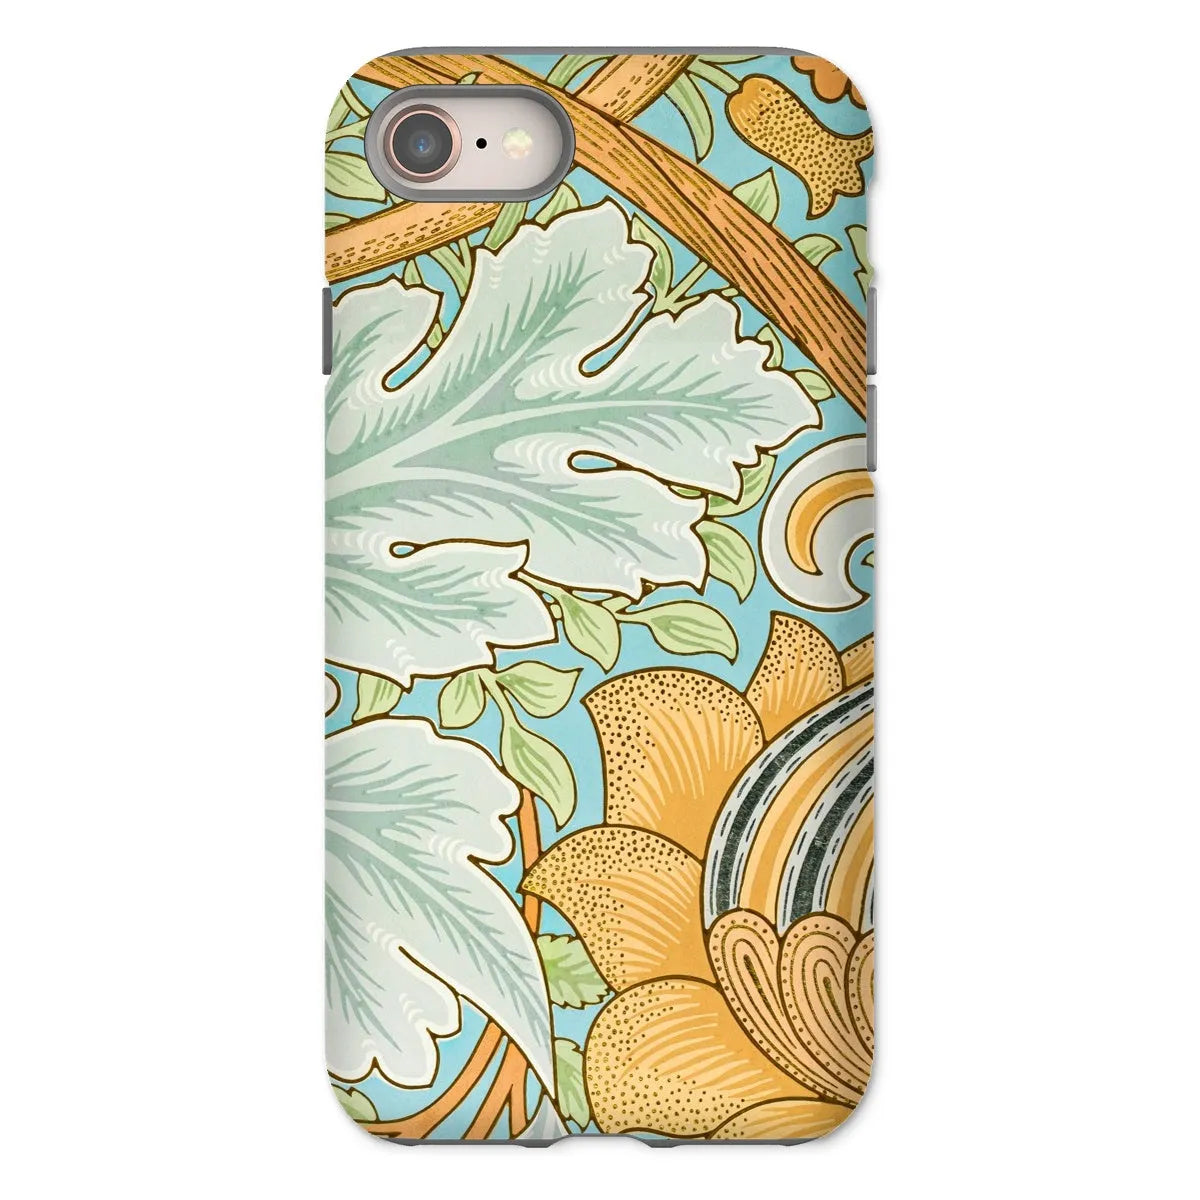 St. James - Arts And Crafts Phone Case - William Morris - Iphone 8 / Matte - Mobile Phone Cases - Aesthetic Art